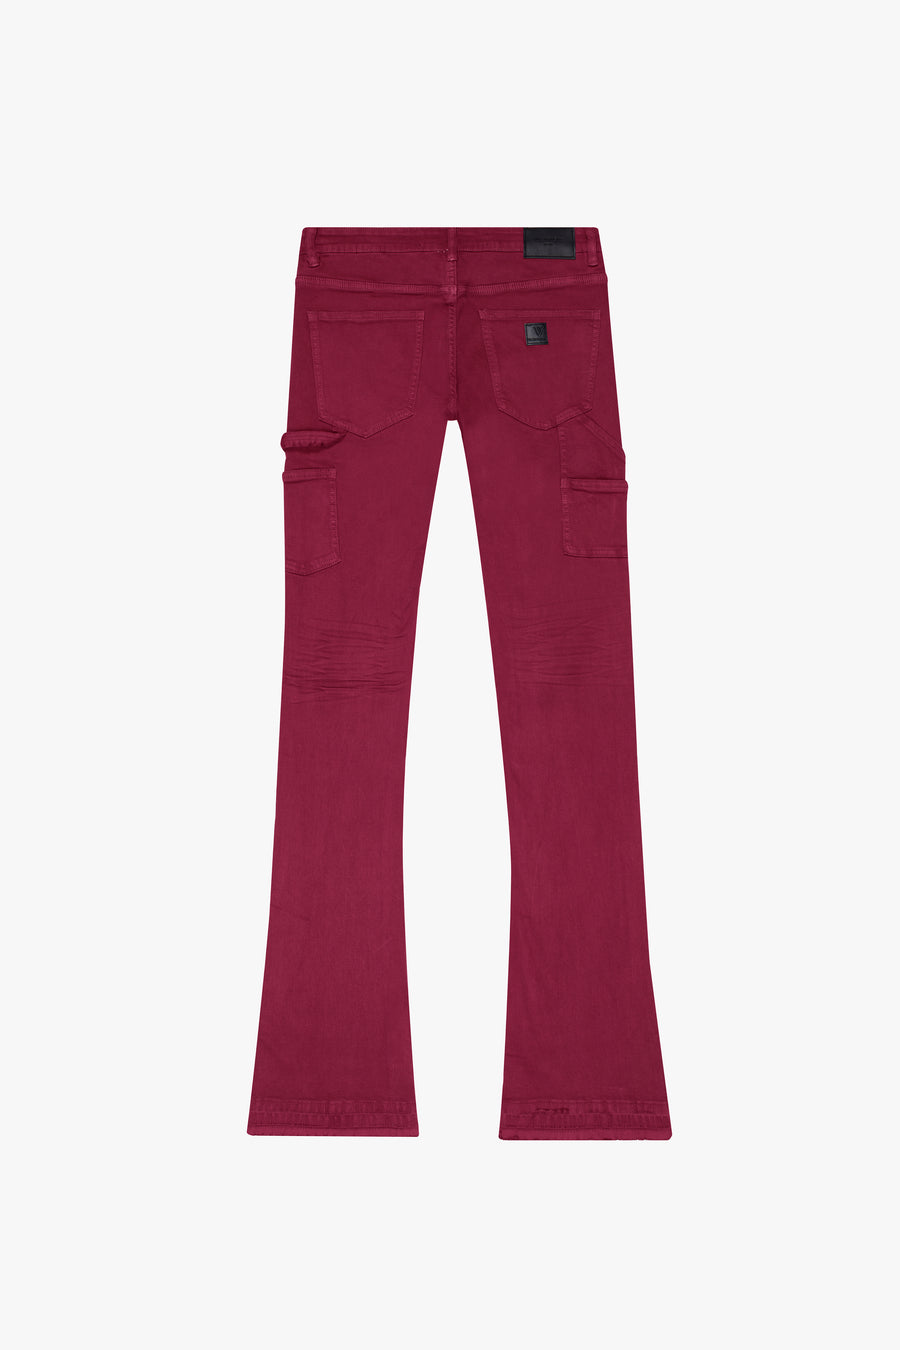 "MR.EXTENDO" PETAL PINK STACKED FLARE JEANS